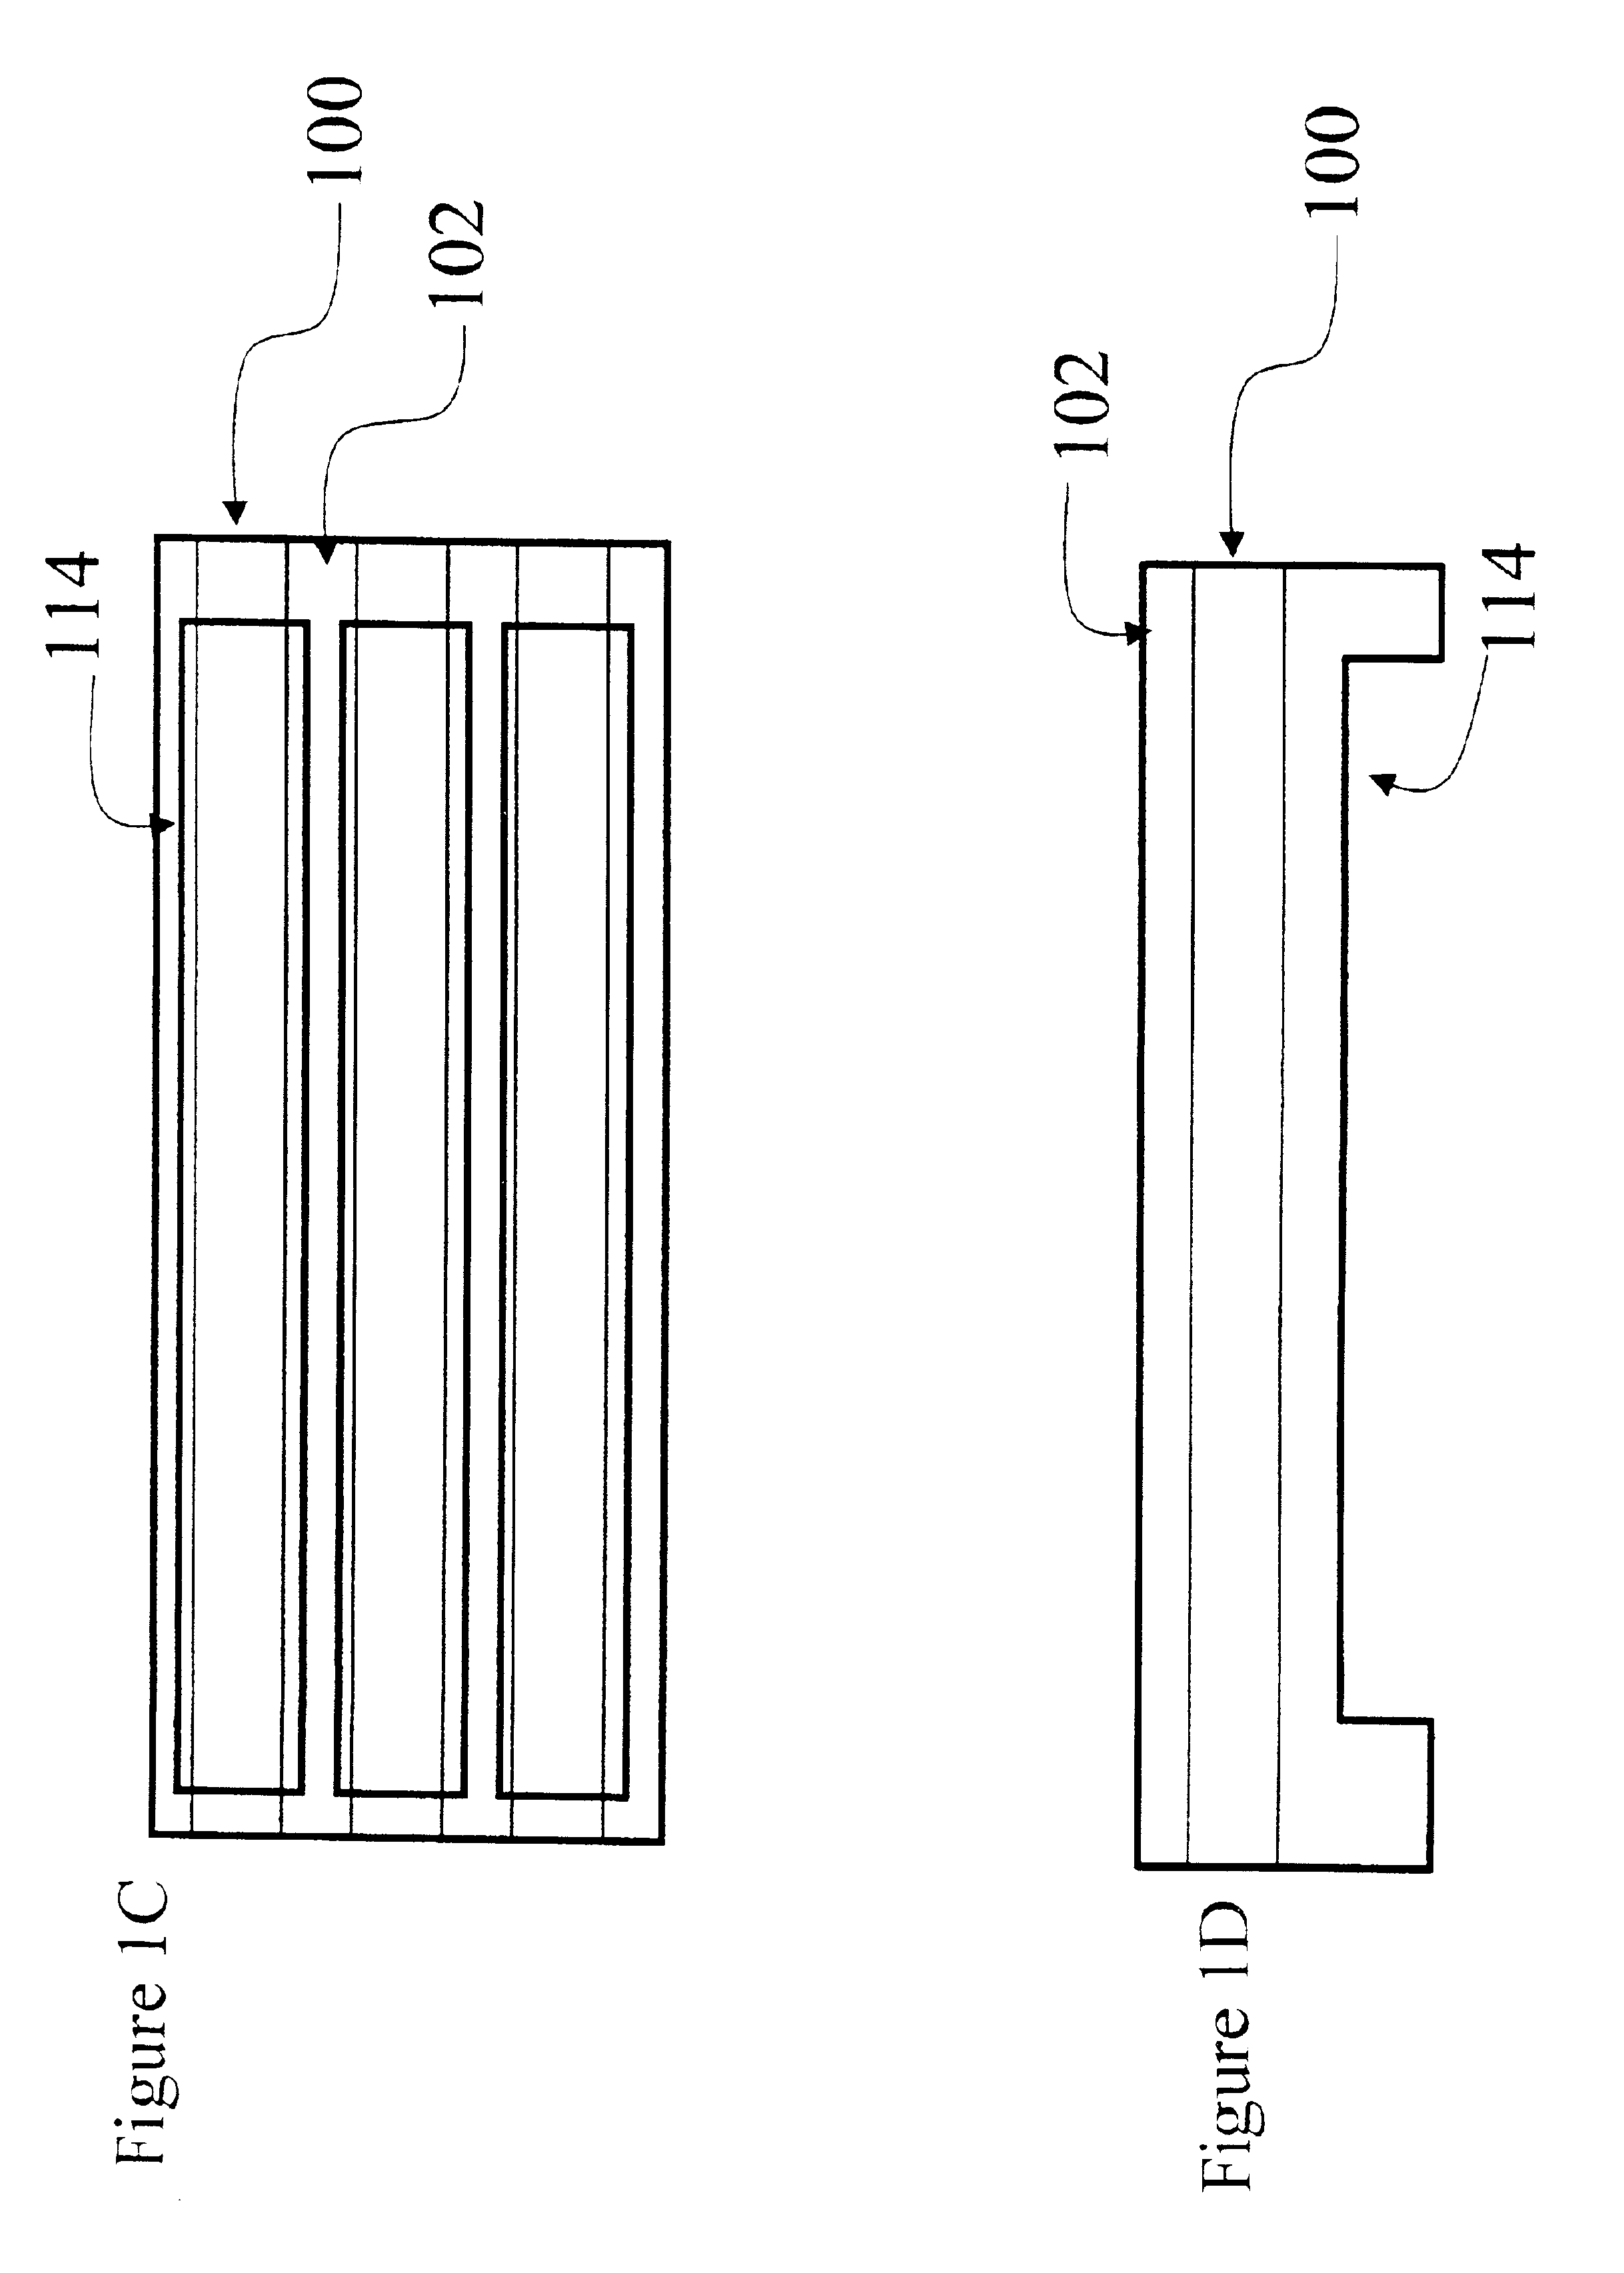 Microvolume device employing fluid movement by centrifugal force